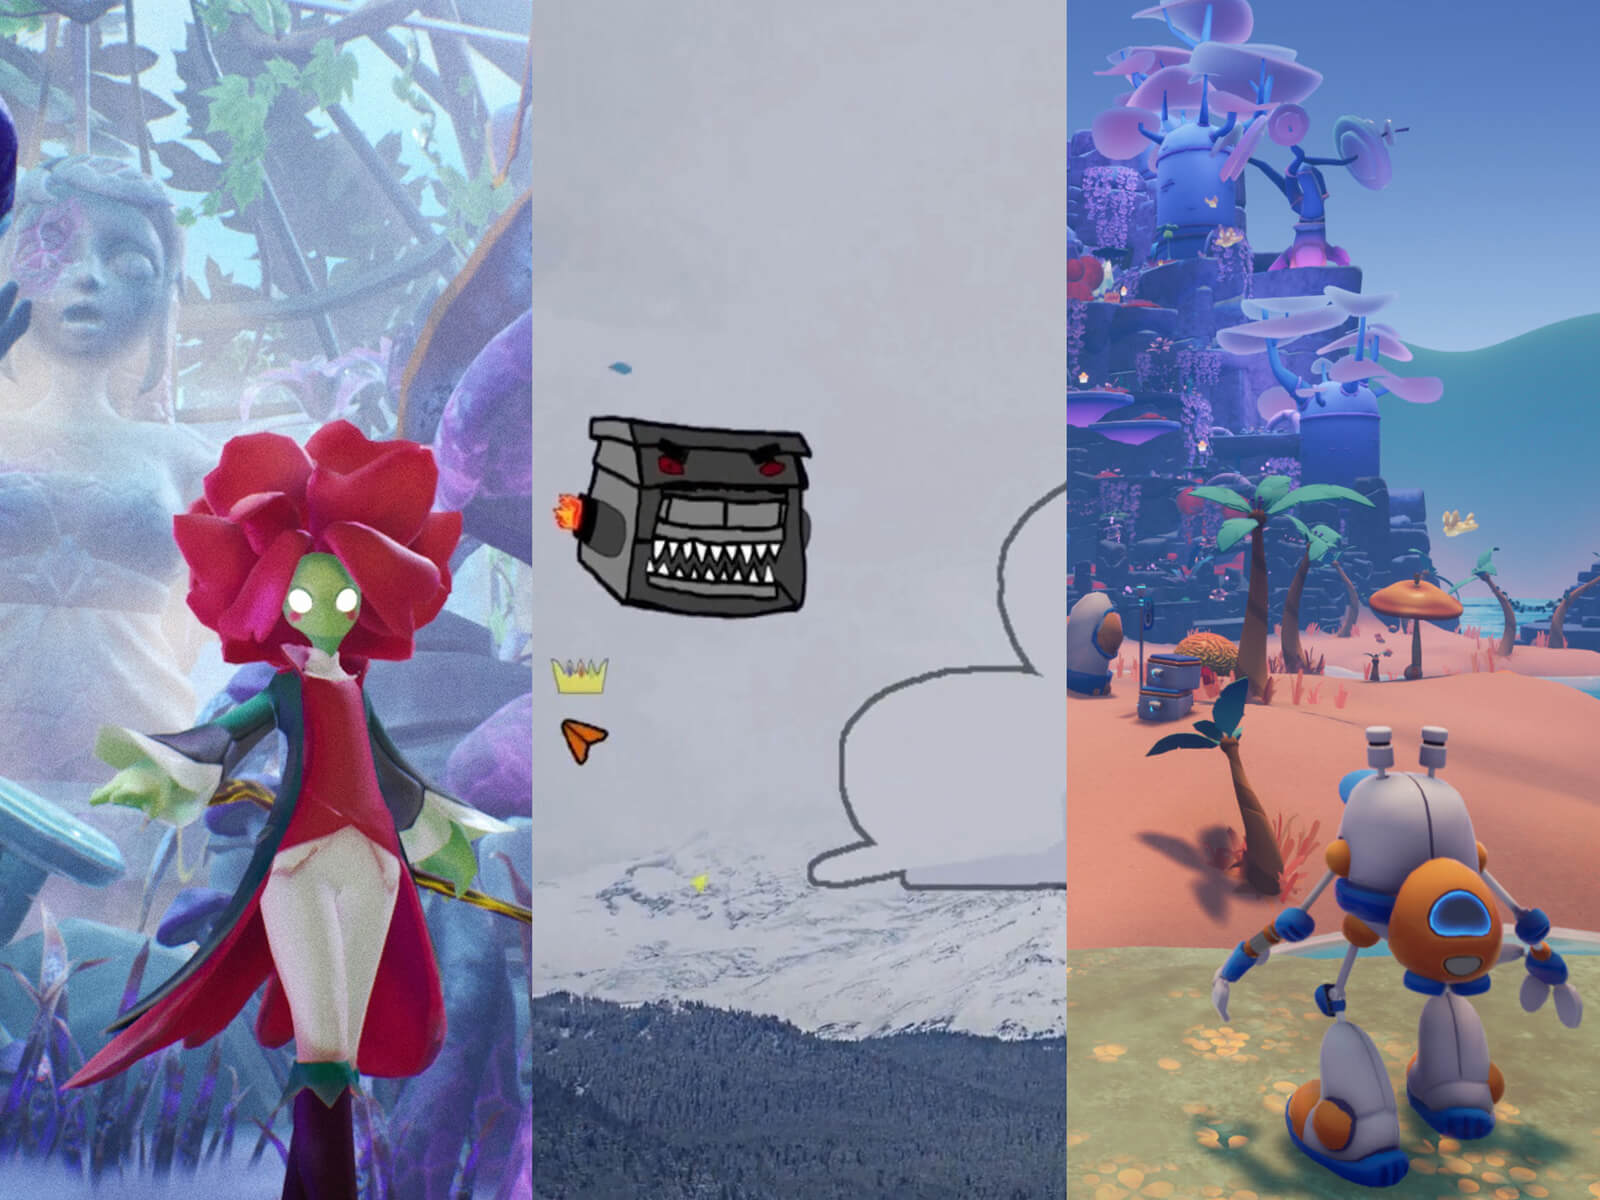 Collage of student game screenshots featuring a robot, gardening witch, and more.